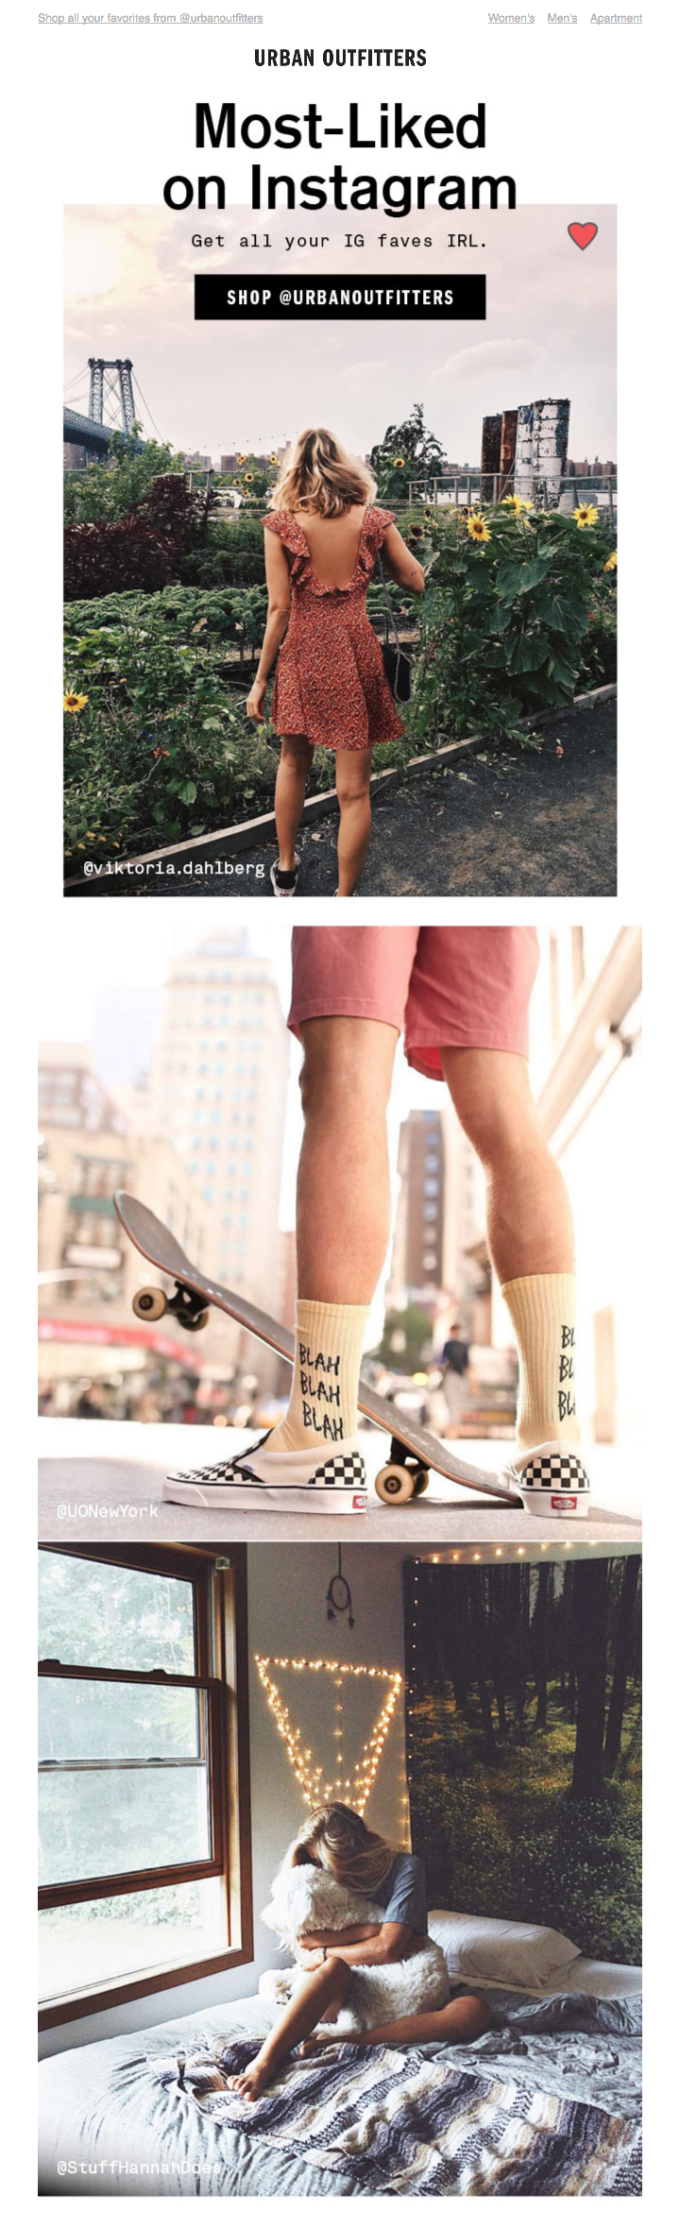 Example of an email repurposing popular Instagram posts as new content from Urban Outfitters